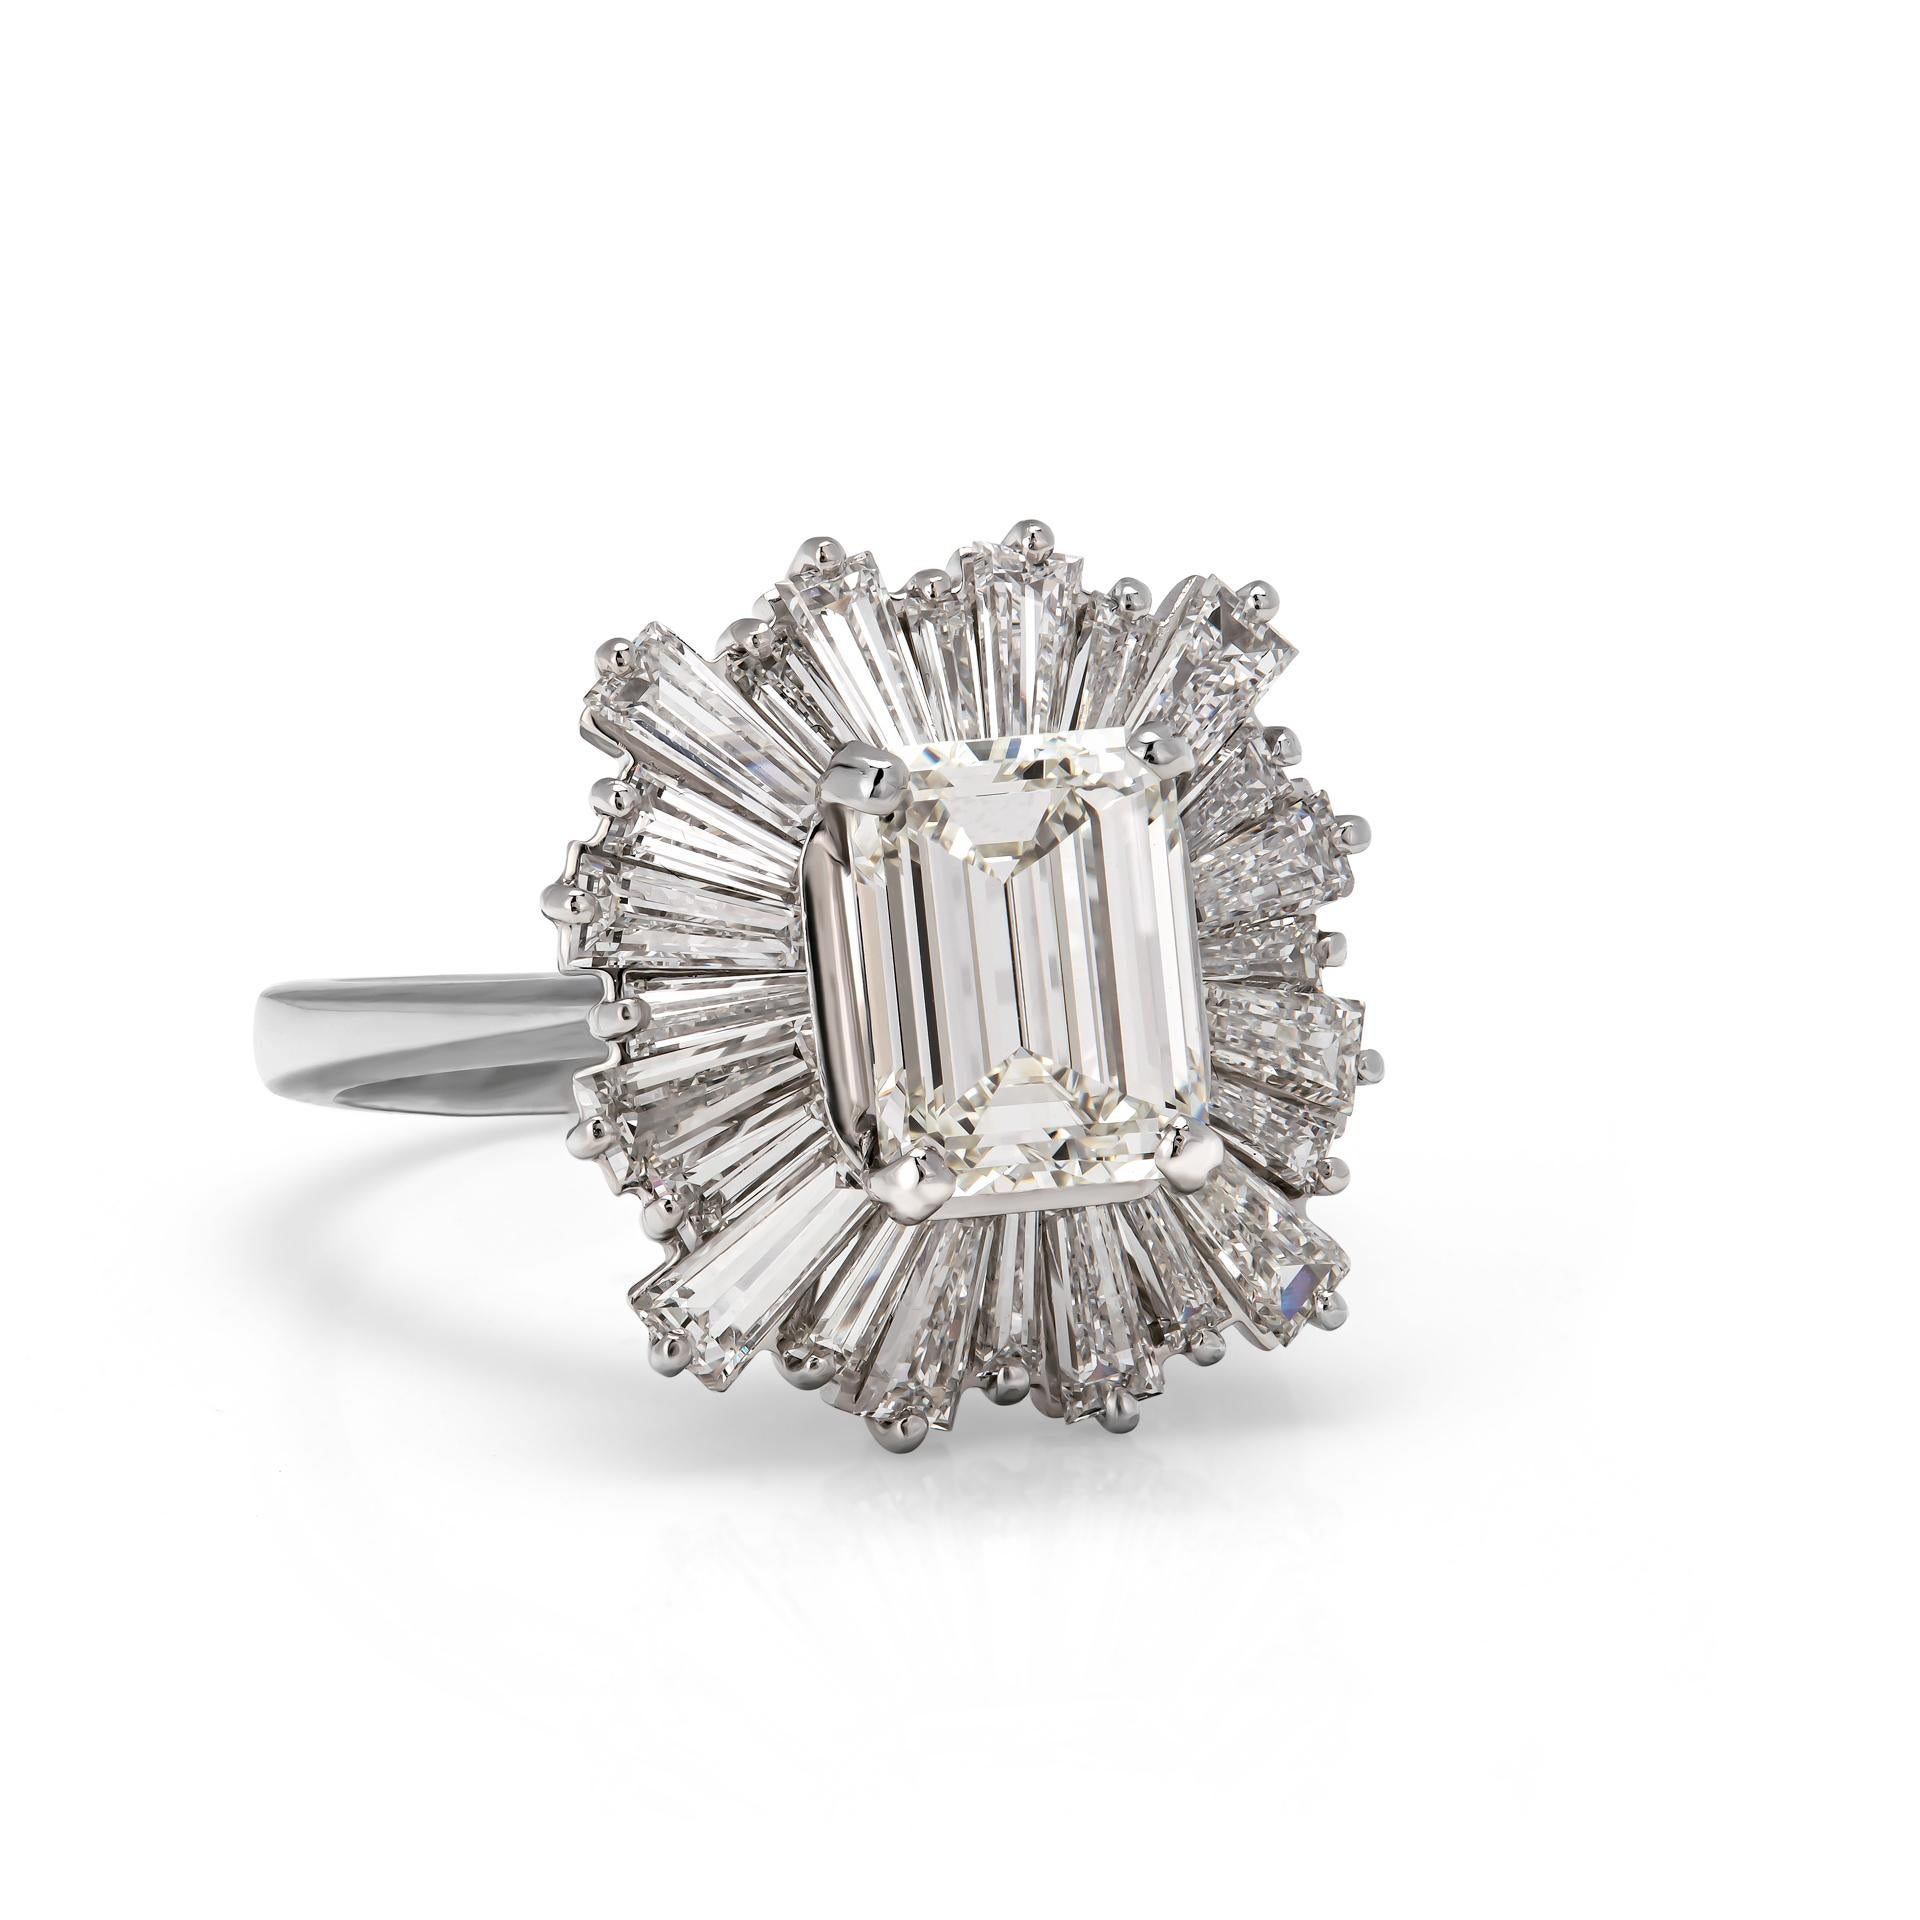 This ring is a one of kind design and an absolute real beauty!
The centerpiece of this vintage-inspired ring features a stunning natural 2.40 carat J-color, VS1-clarity diamond, certified by GIA. 
Its remarkable brilliance is enhanced by a unique